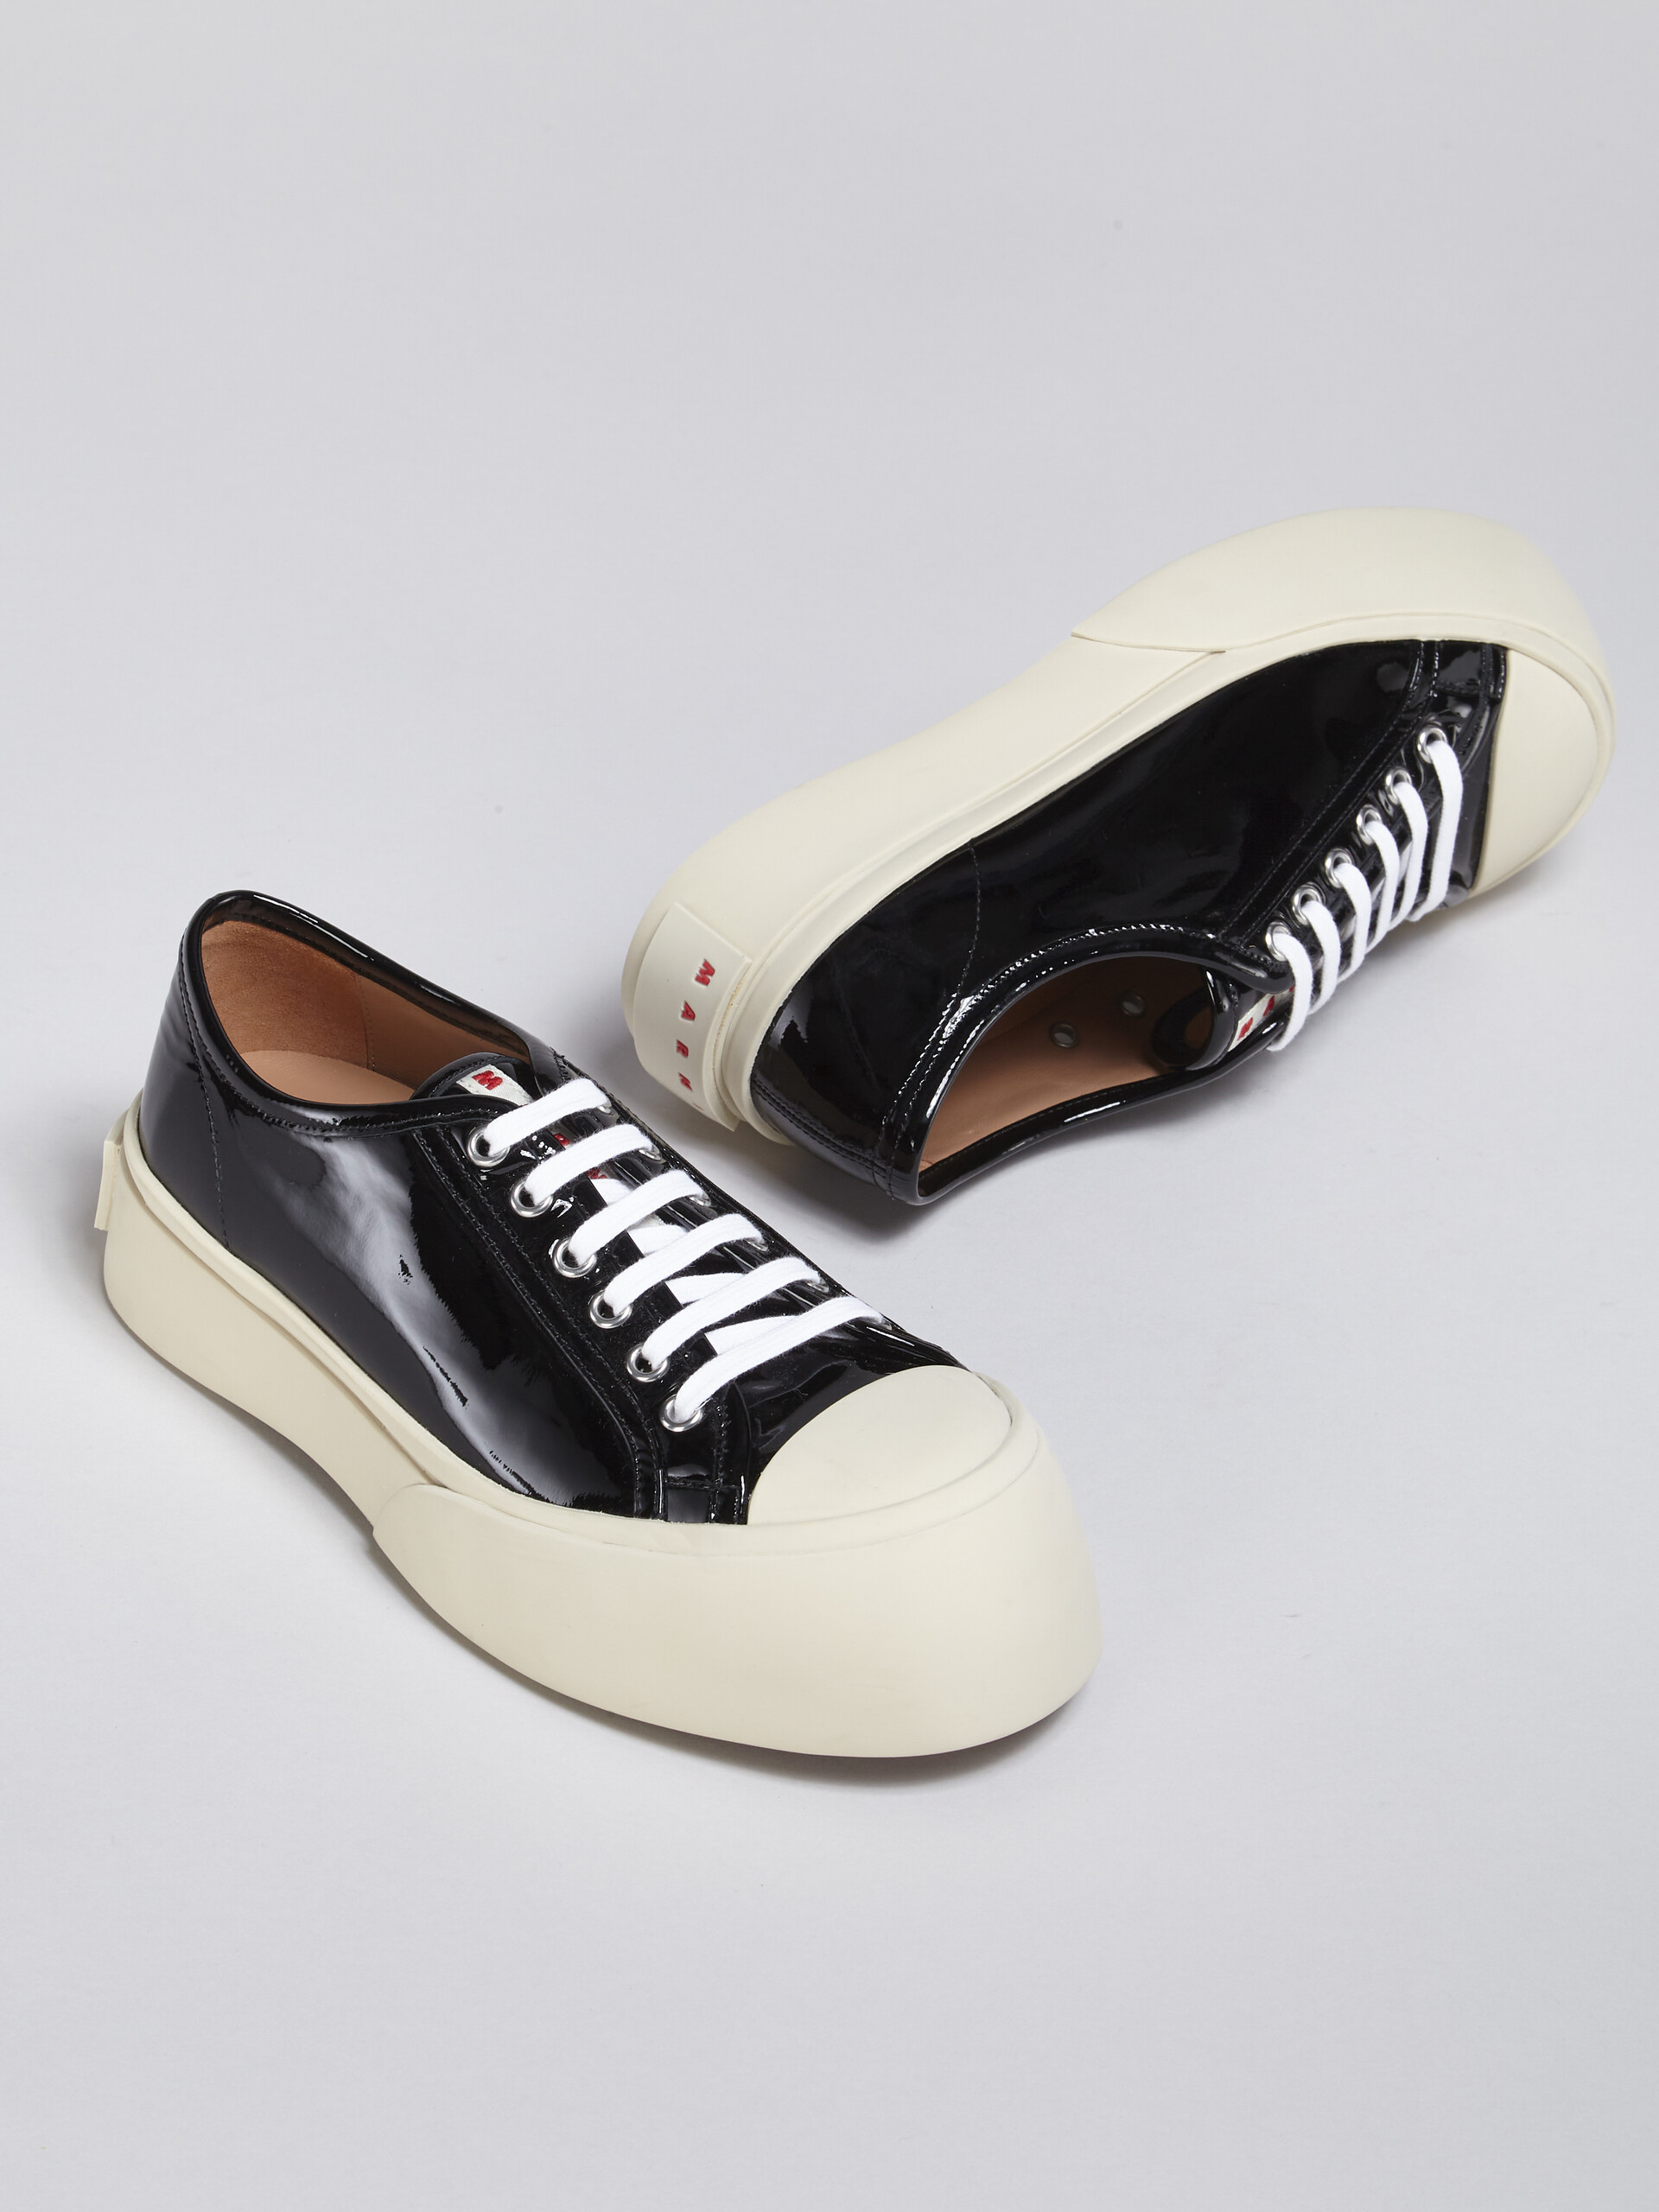 Black patent leather PABLO lace-up sneaker - Sneakers - Image 5